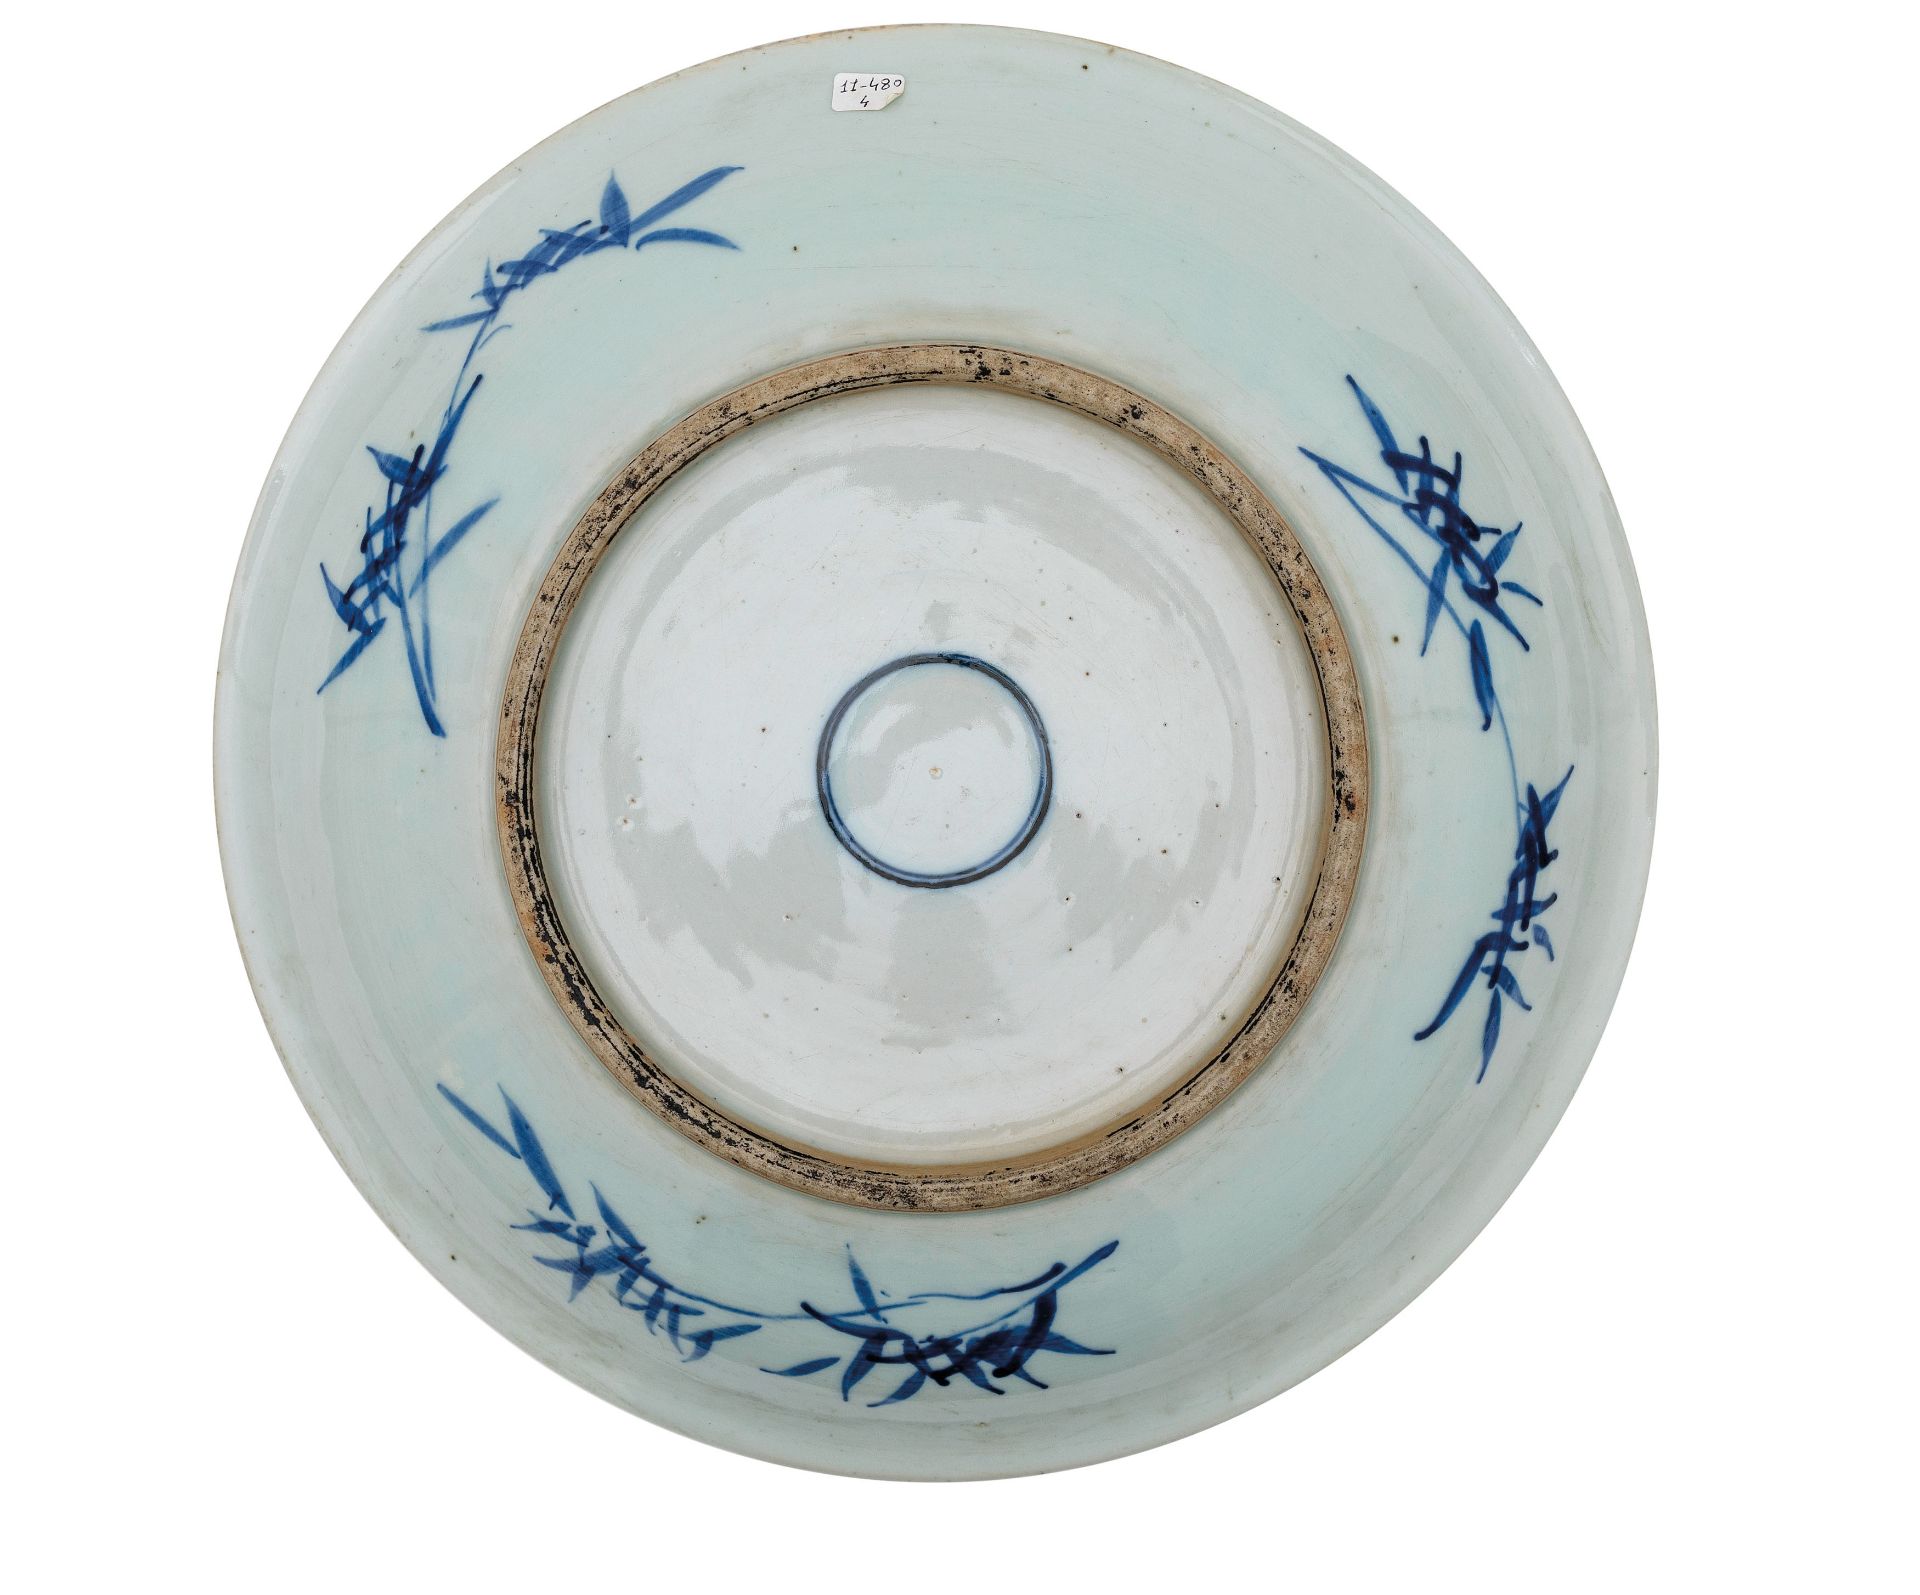 A LARGE BLUE AND WHITE SAUCER DISH, CHINA, 19TH CENTURY - Image 2 of 2